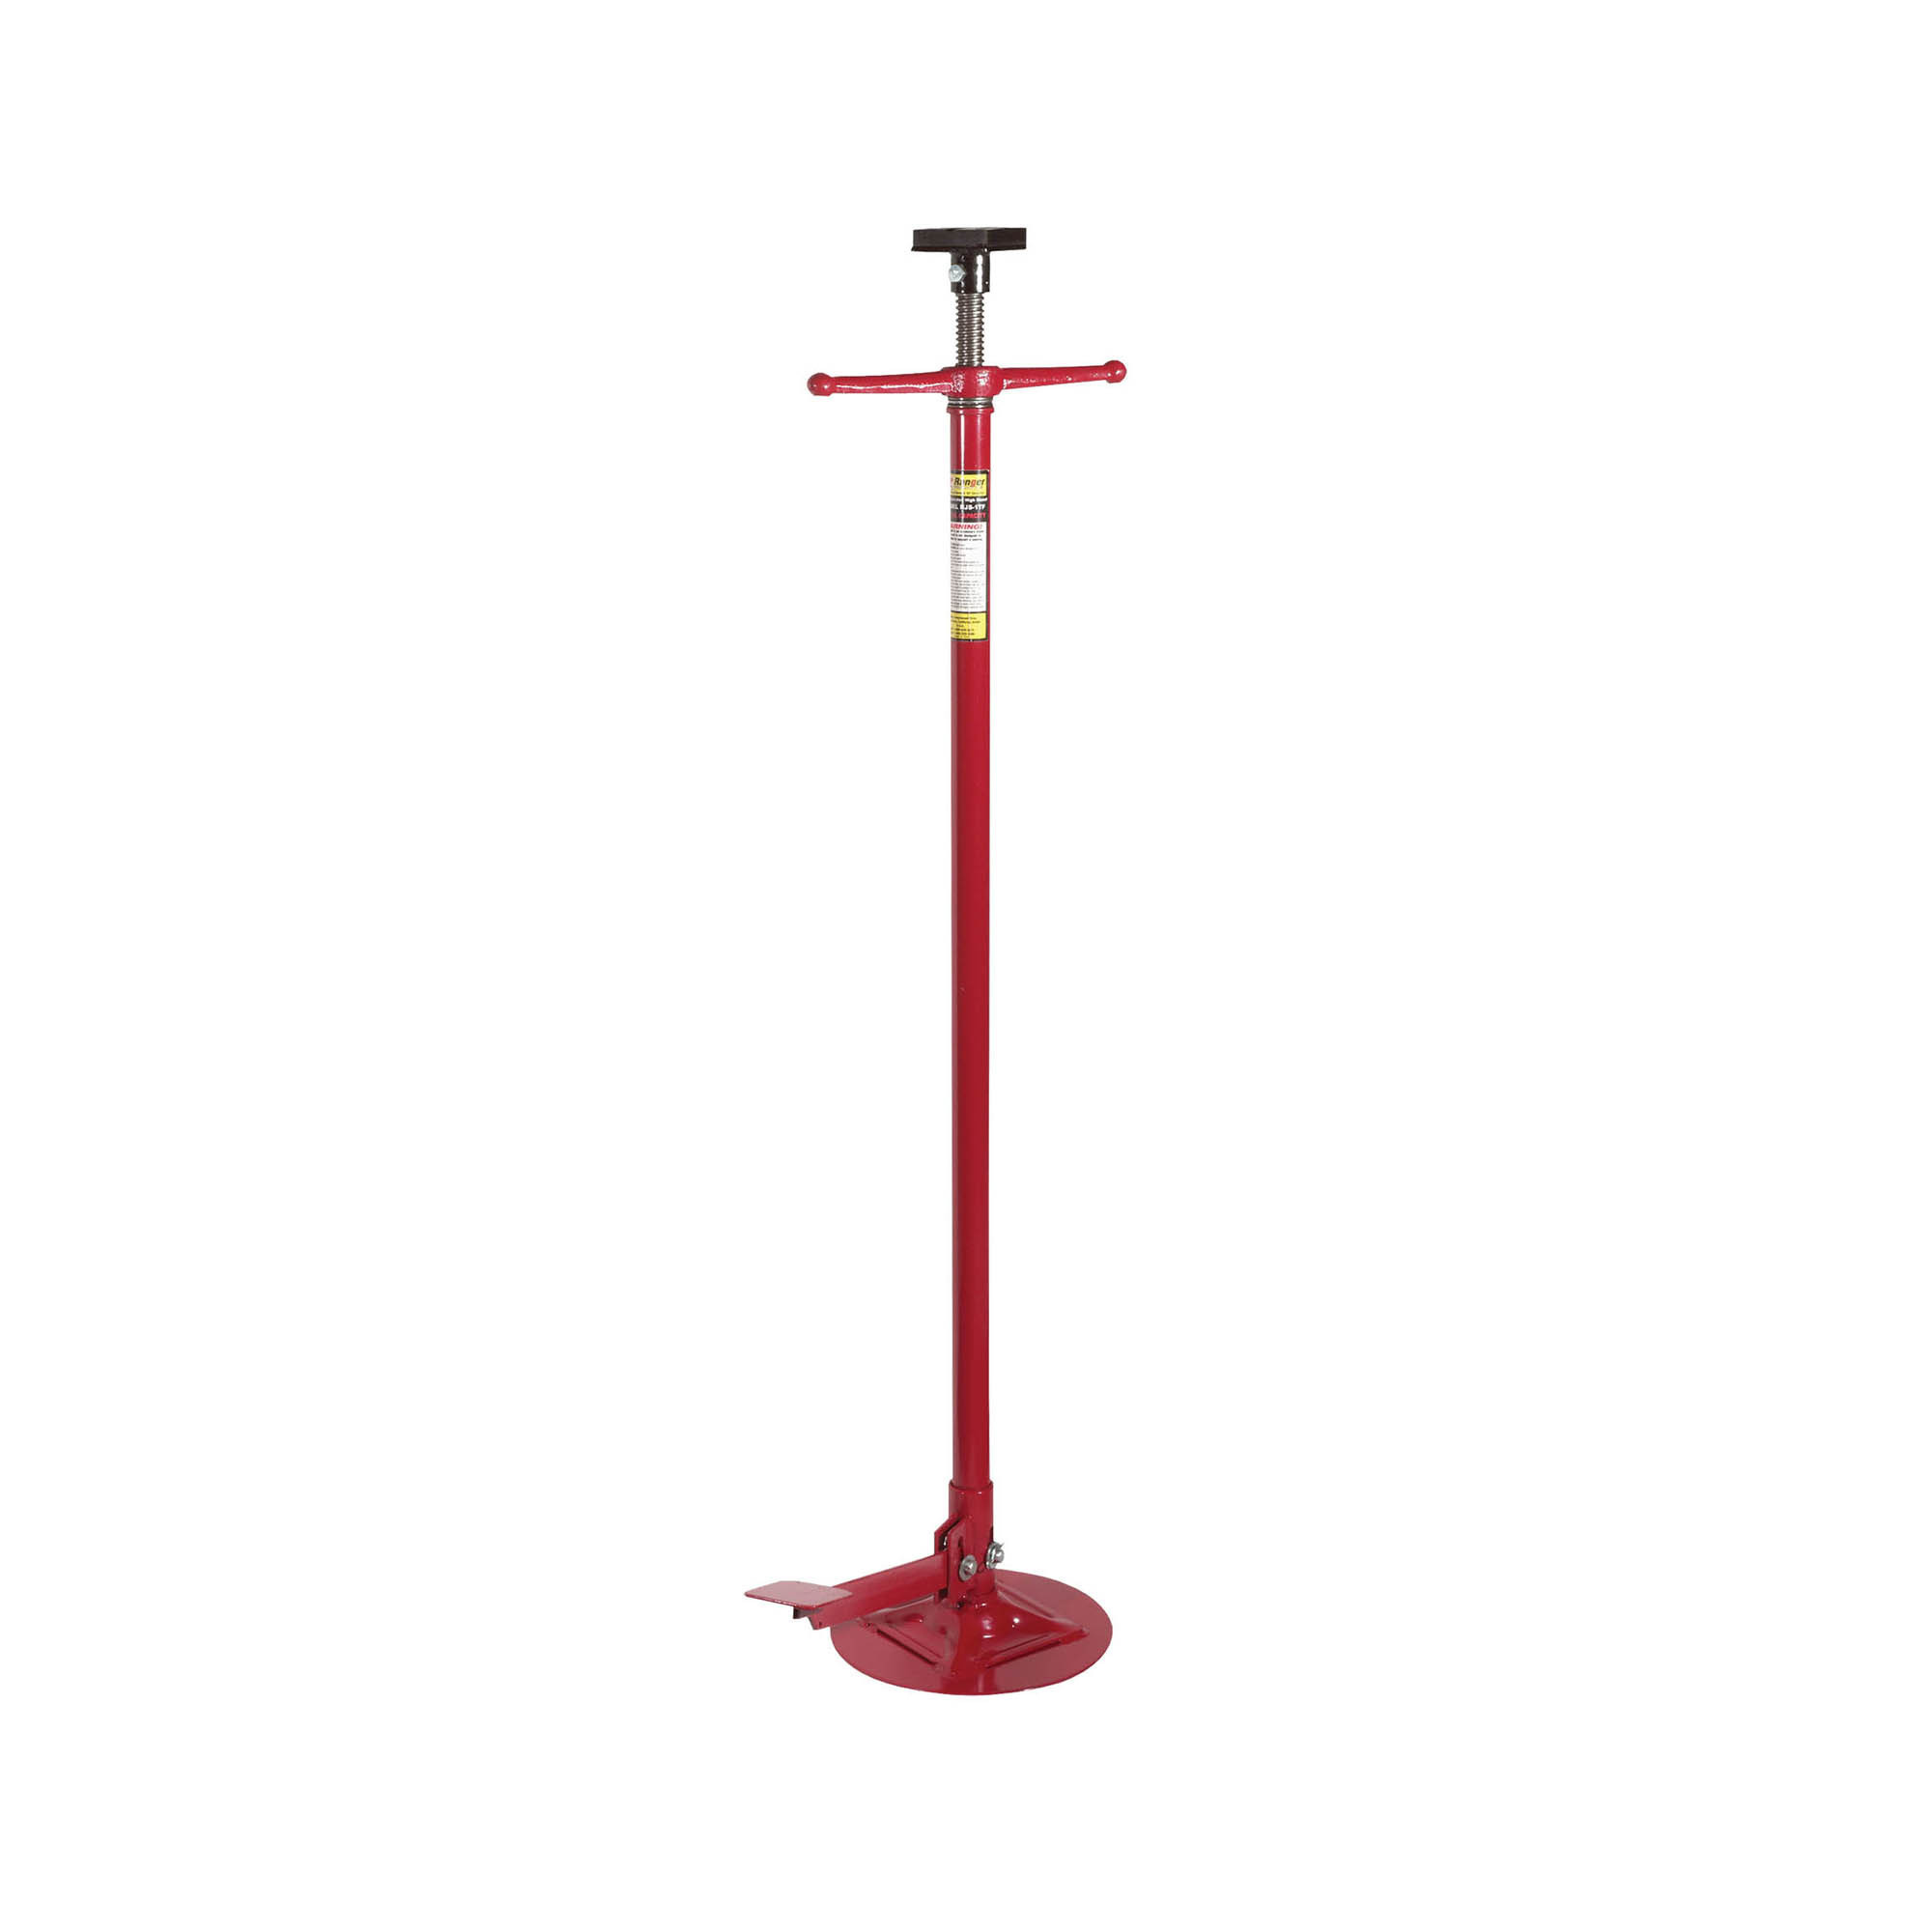 Ranger, Foot Operated High Reach Jack Stand, Lift Capacity 1 Tons, Max. Lift Height 80.5 in, MInch Lift Height 54.5 in, Model RJS-1TF